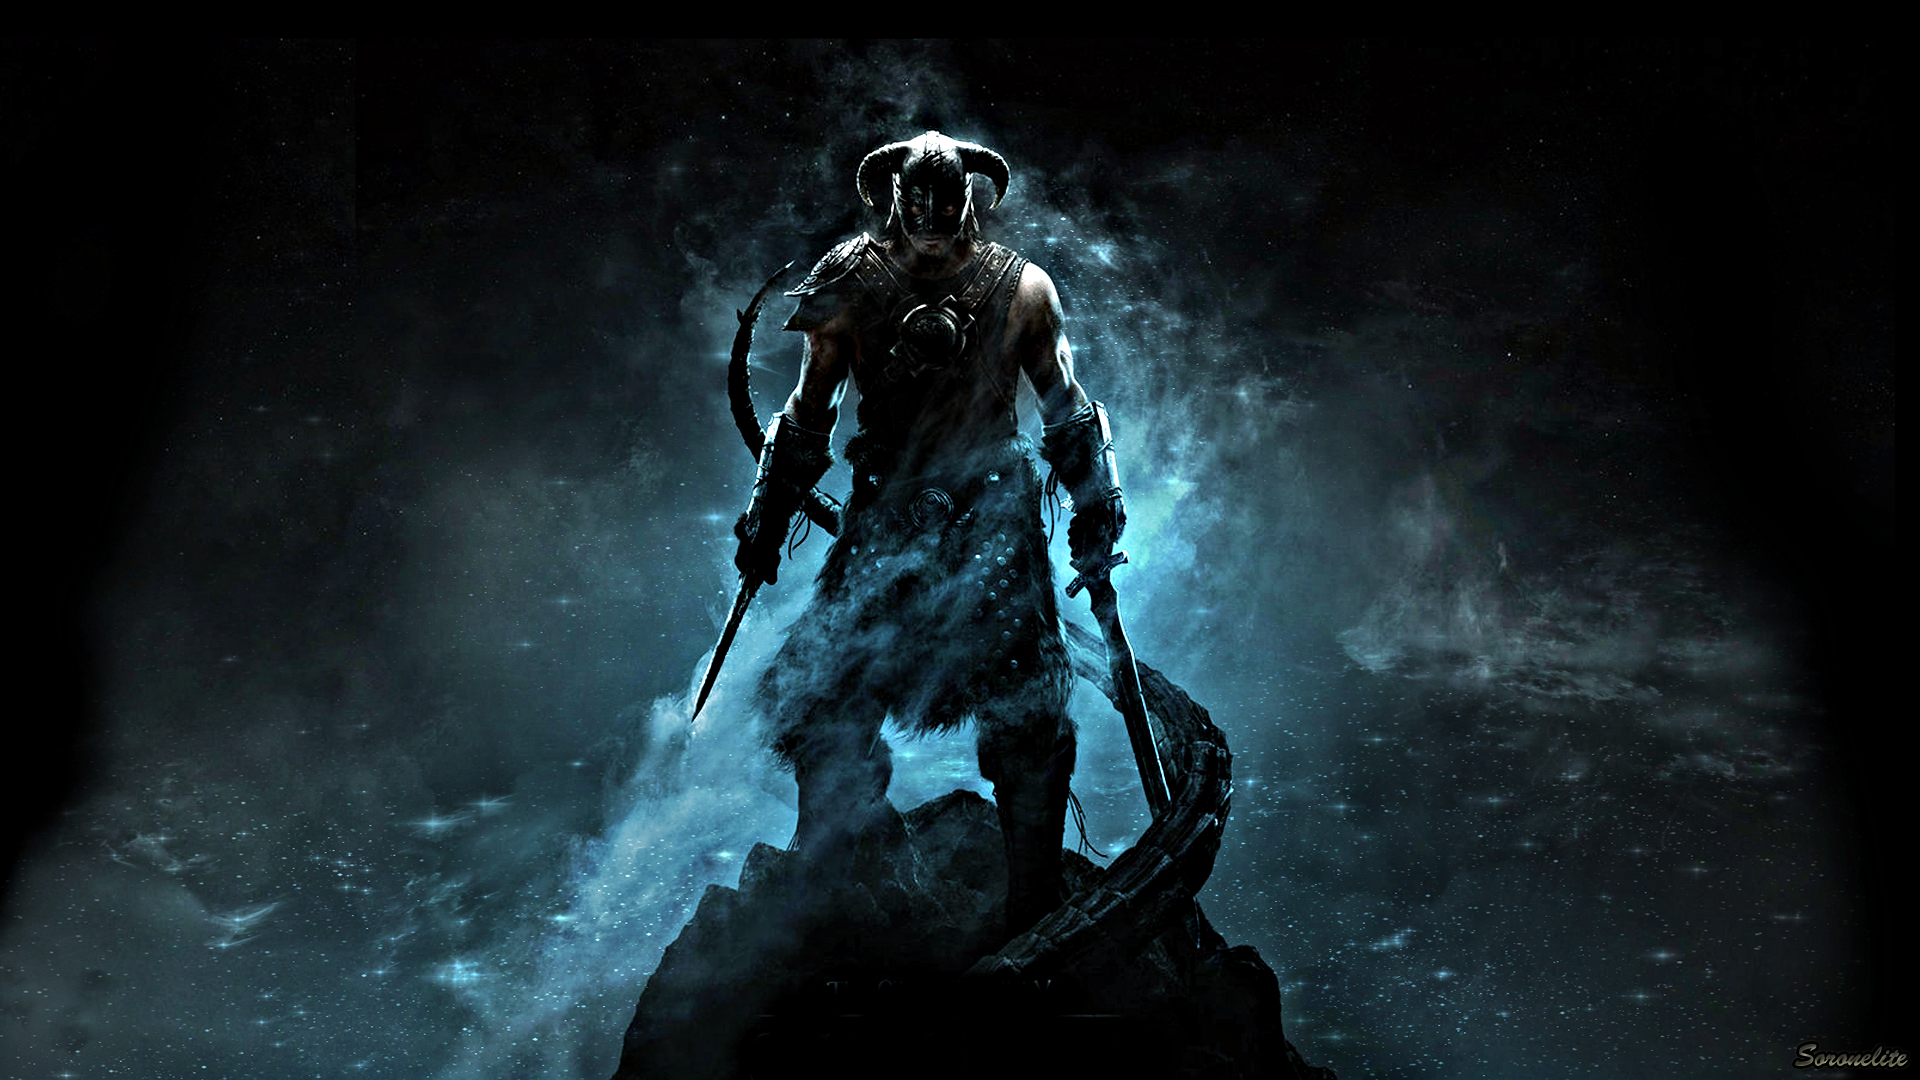 Skyrim Wallpaper HD Pictures To